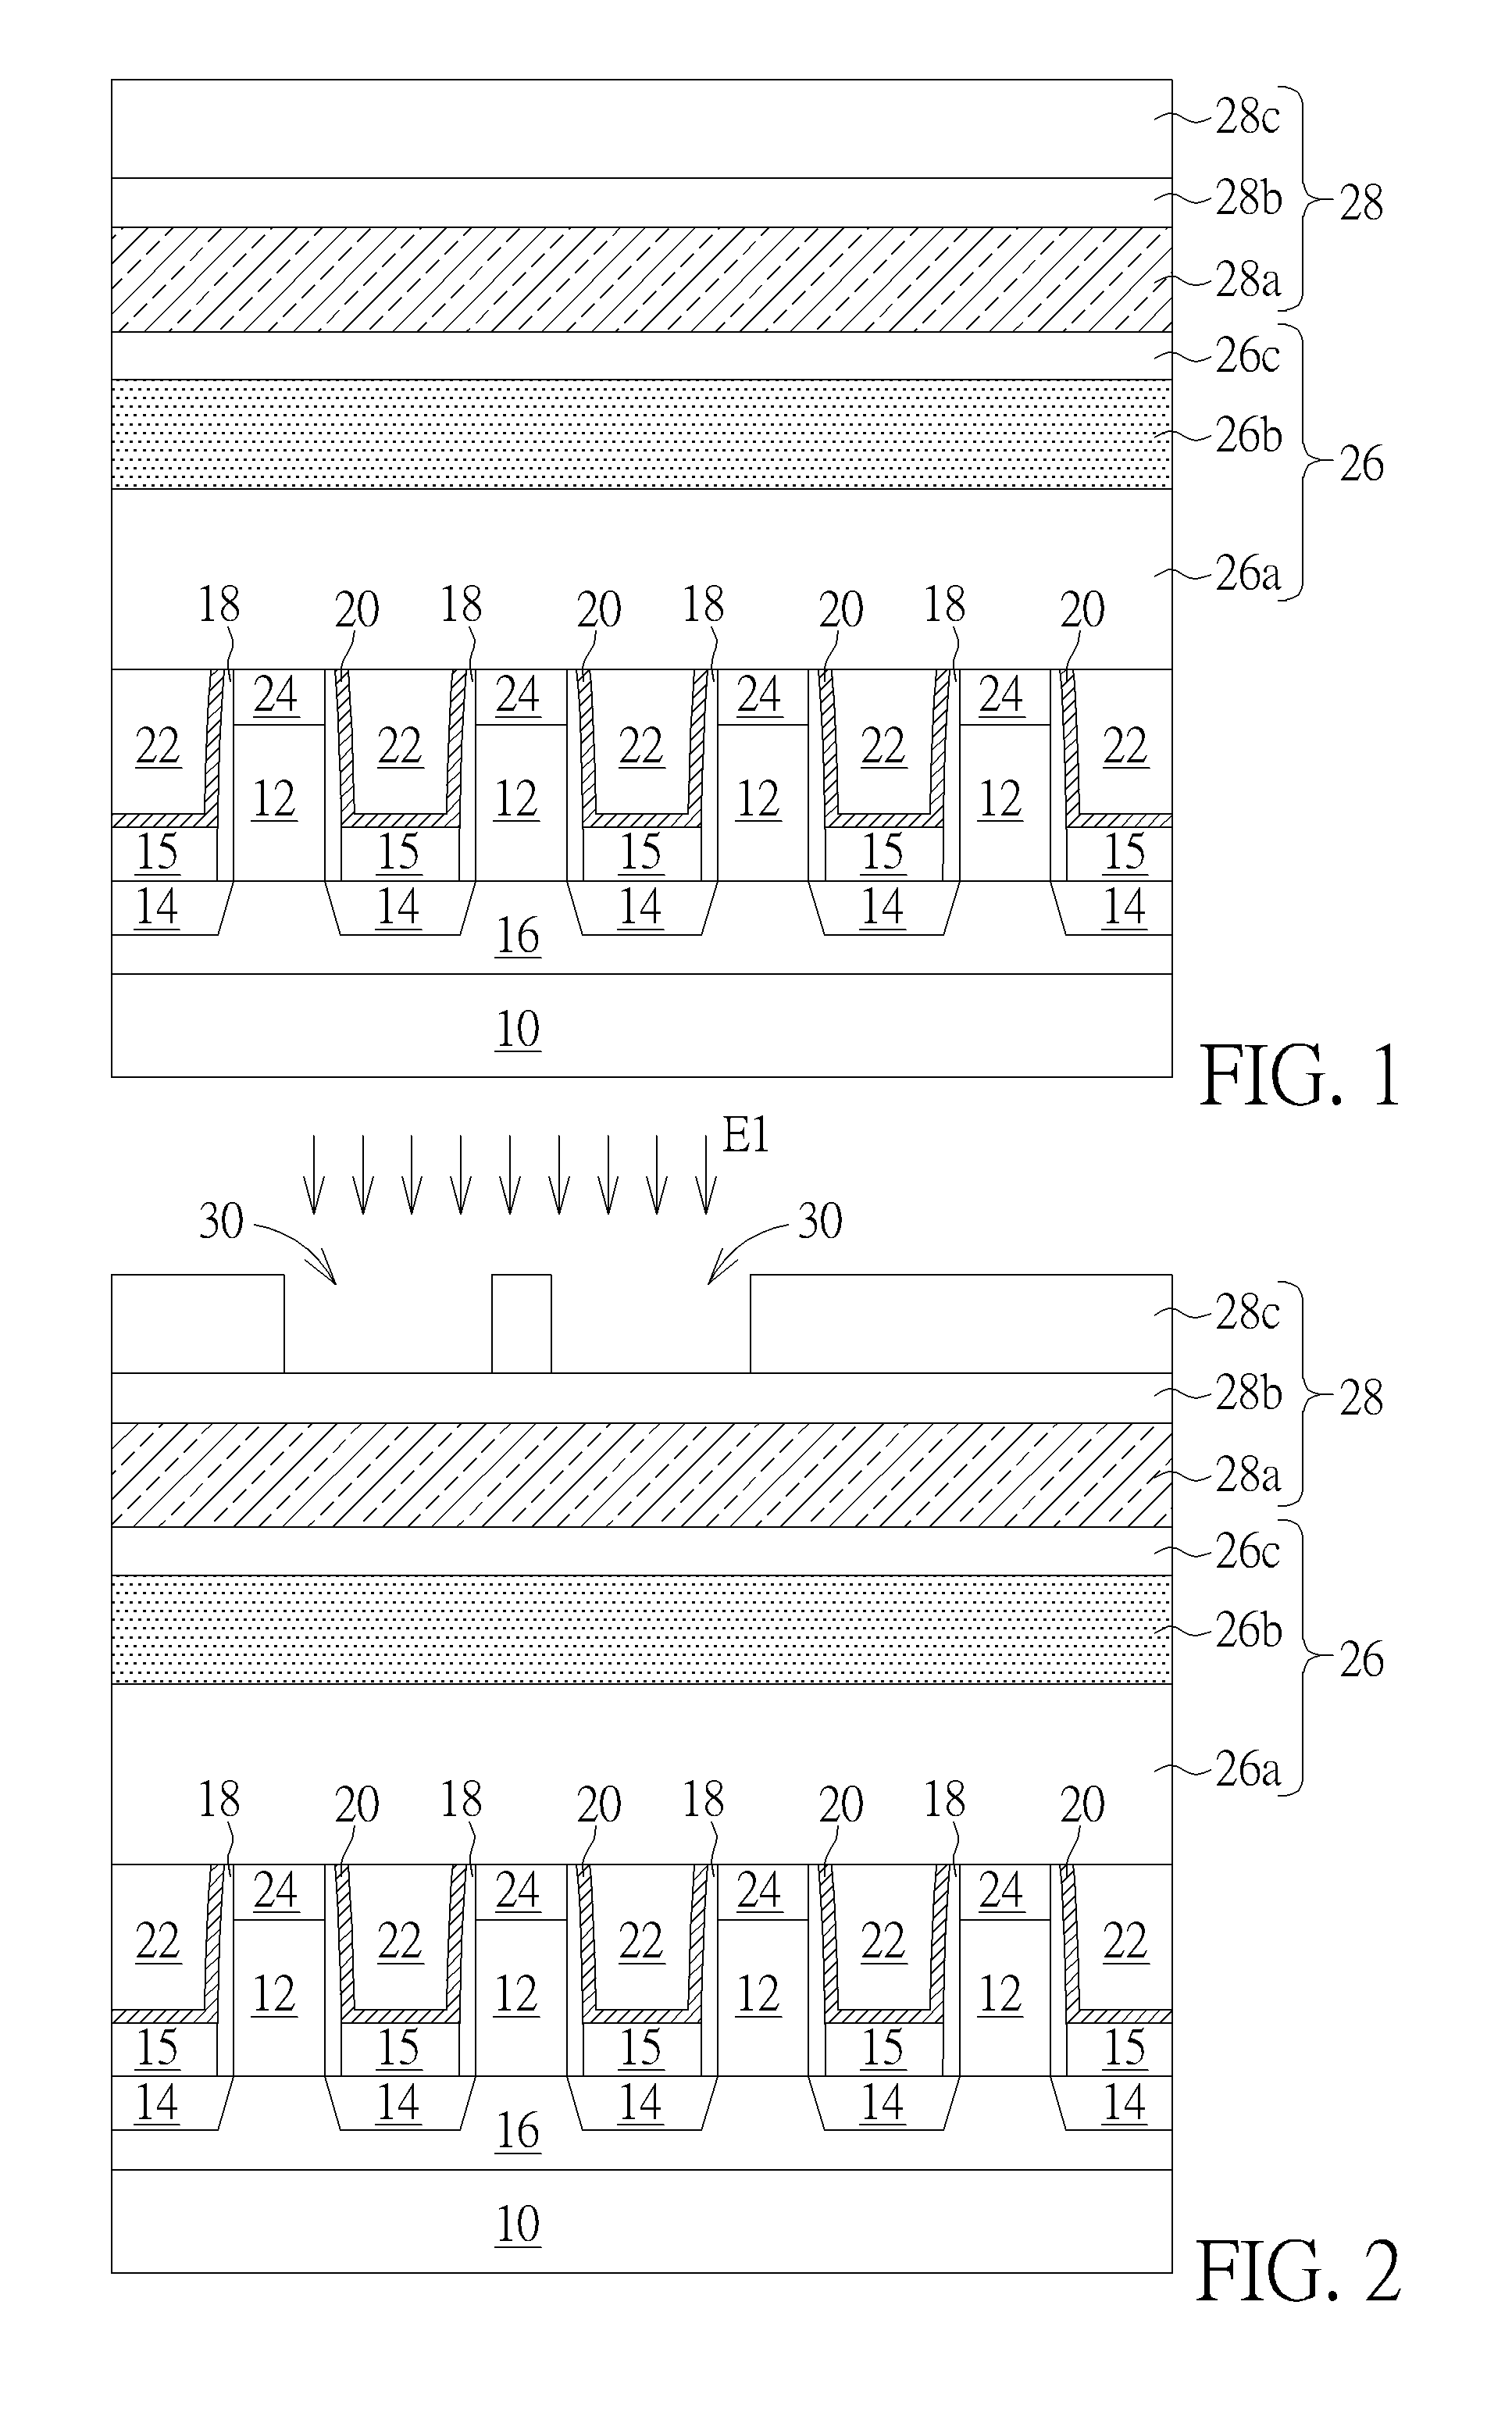 Manufacturing method for forming a semiconductor structure